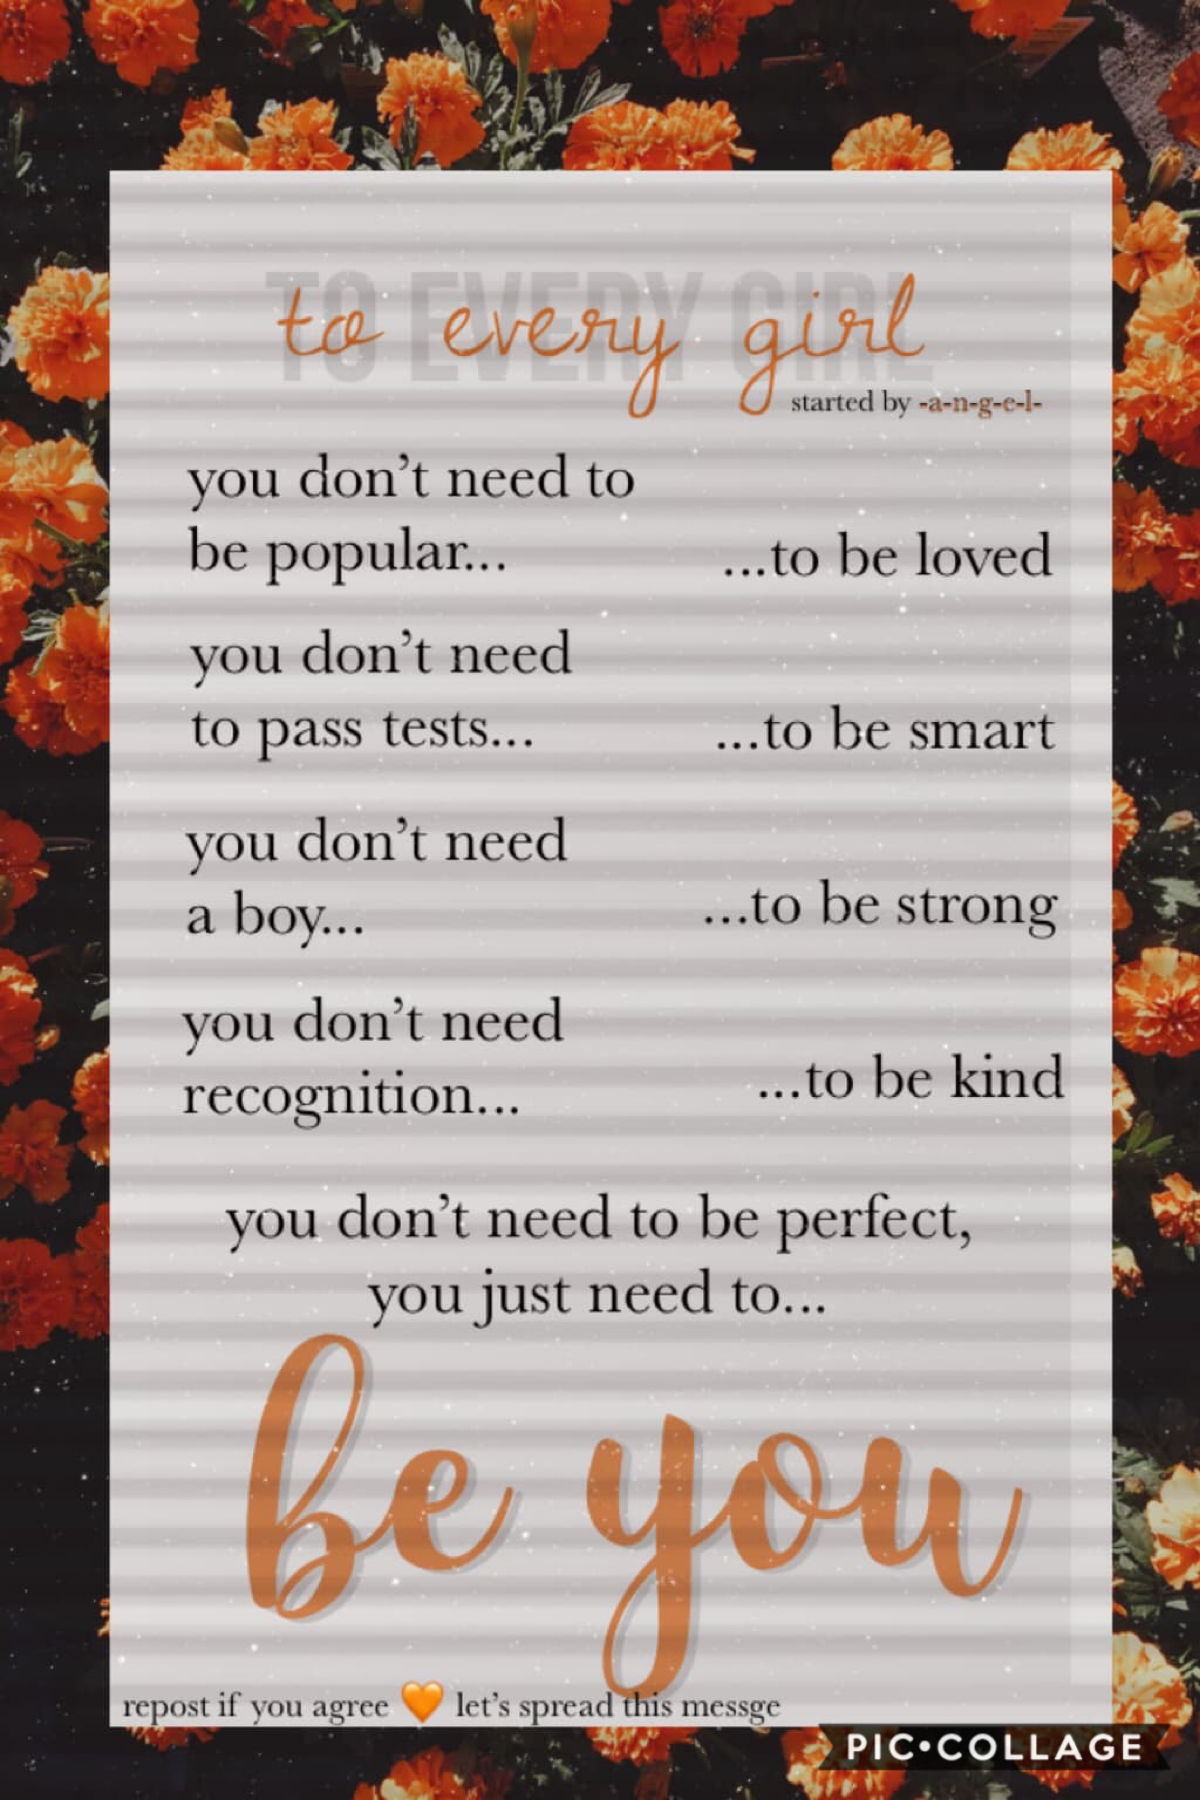 🧡 tap🧡 
This inspirational message came from an amazing girl who has given me confidence. Please follow her and repost this message
xxacidlqve 😚